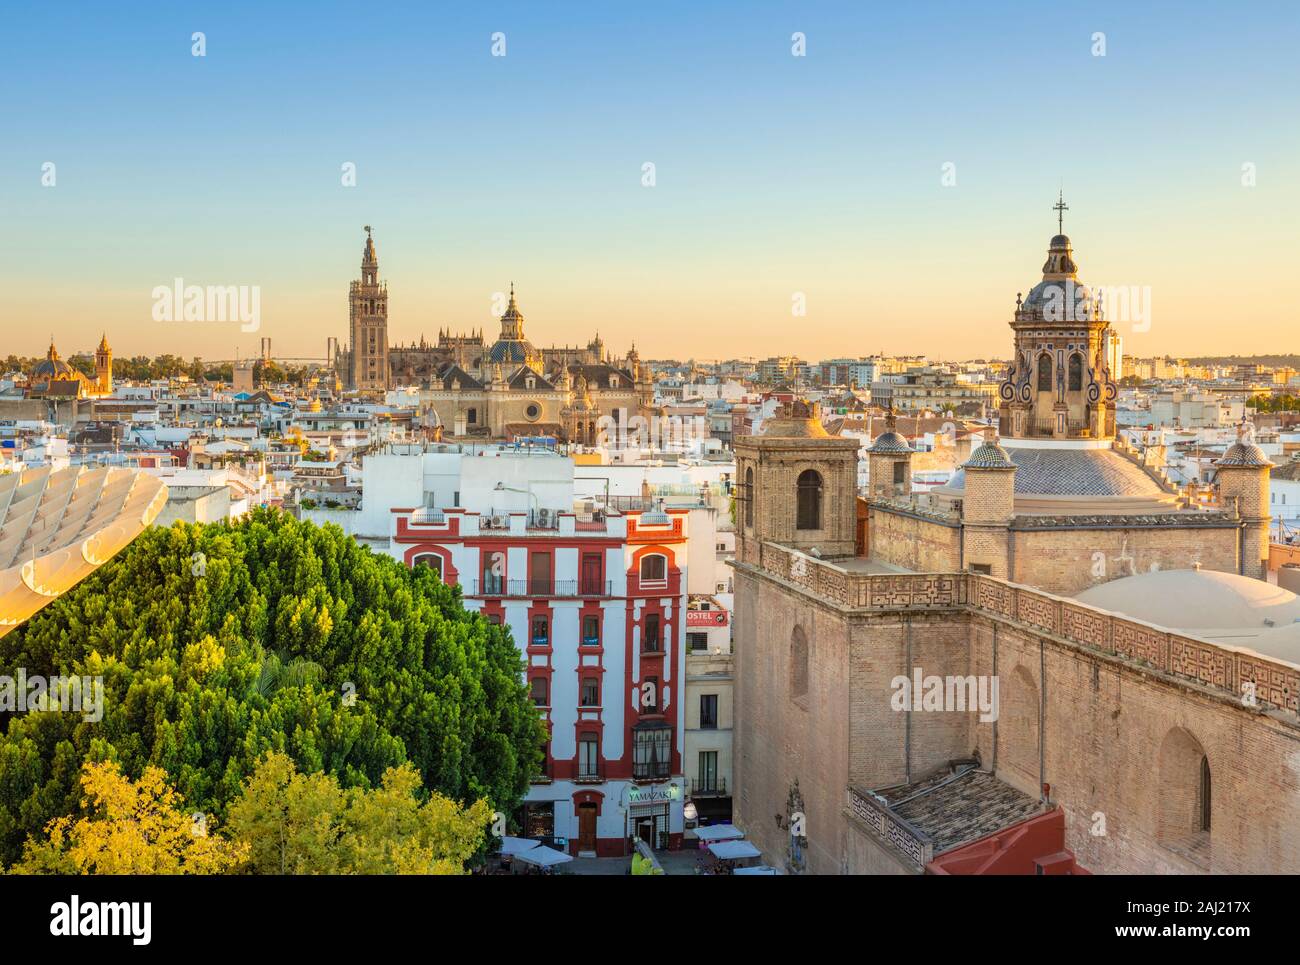 Seville skyline of Cathedral and city rooftops from the Metropol Parasol, Seville, Andalusia, Spain, Europe Stock Photo